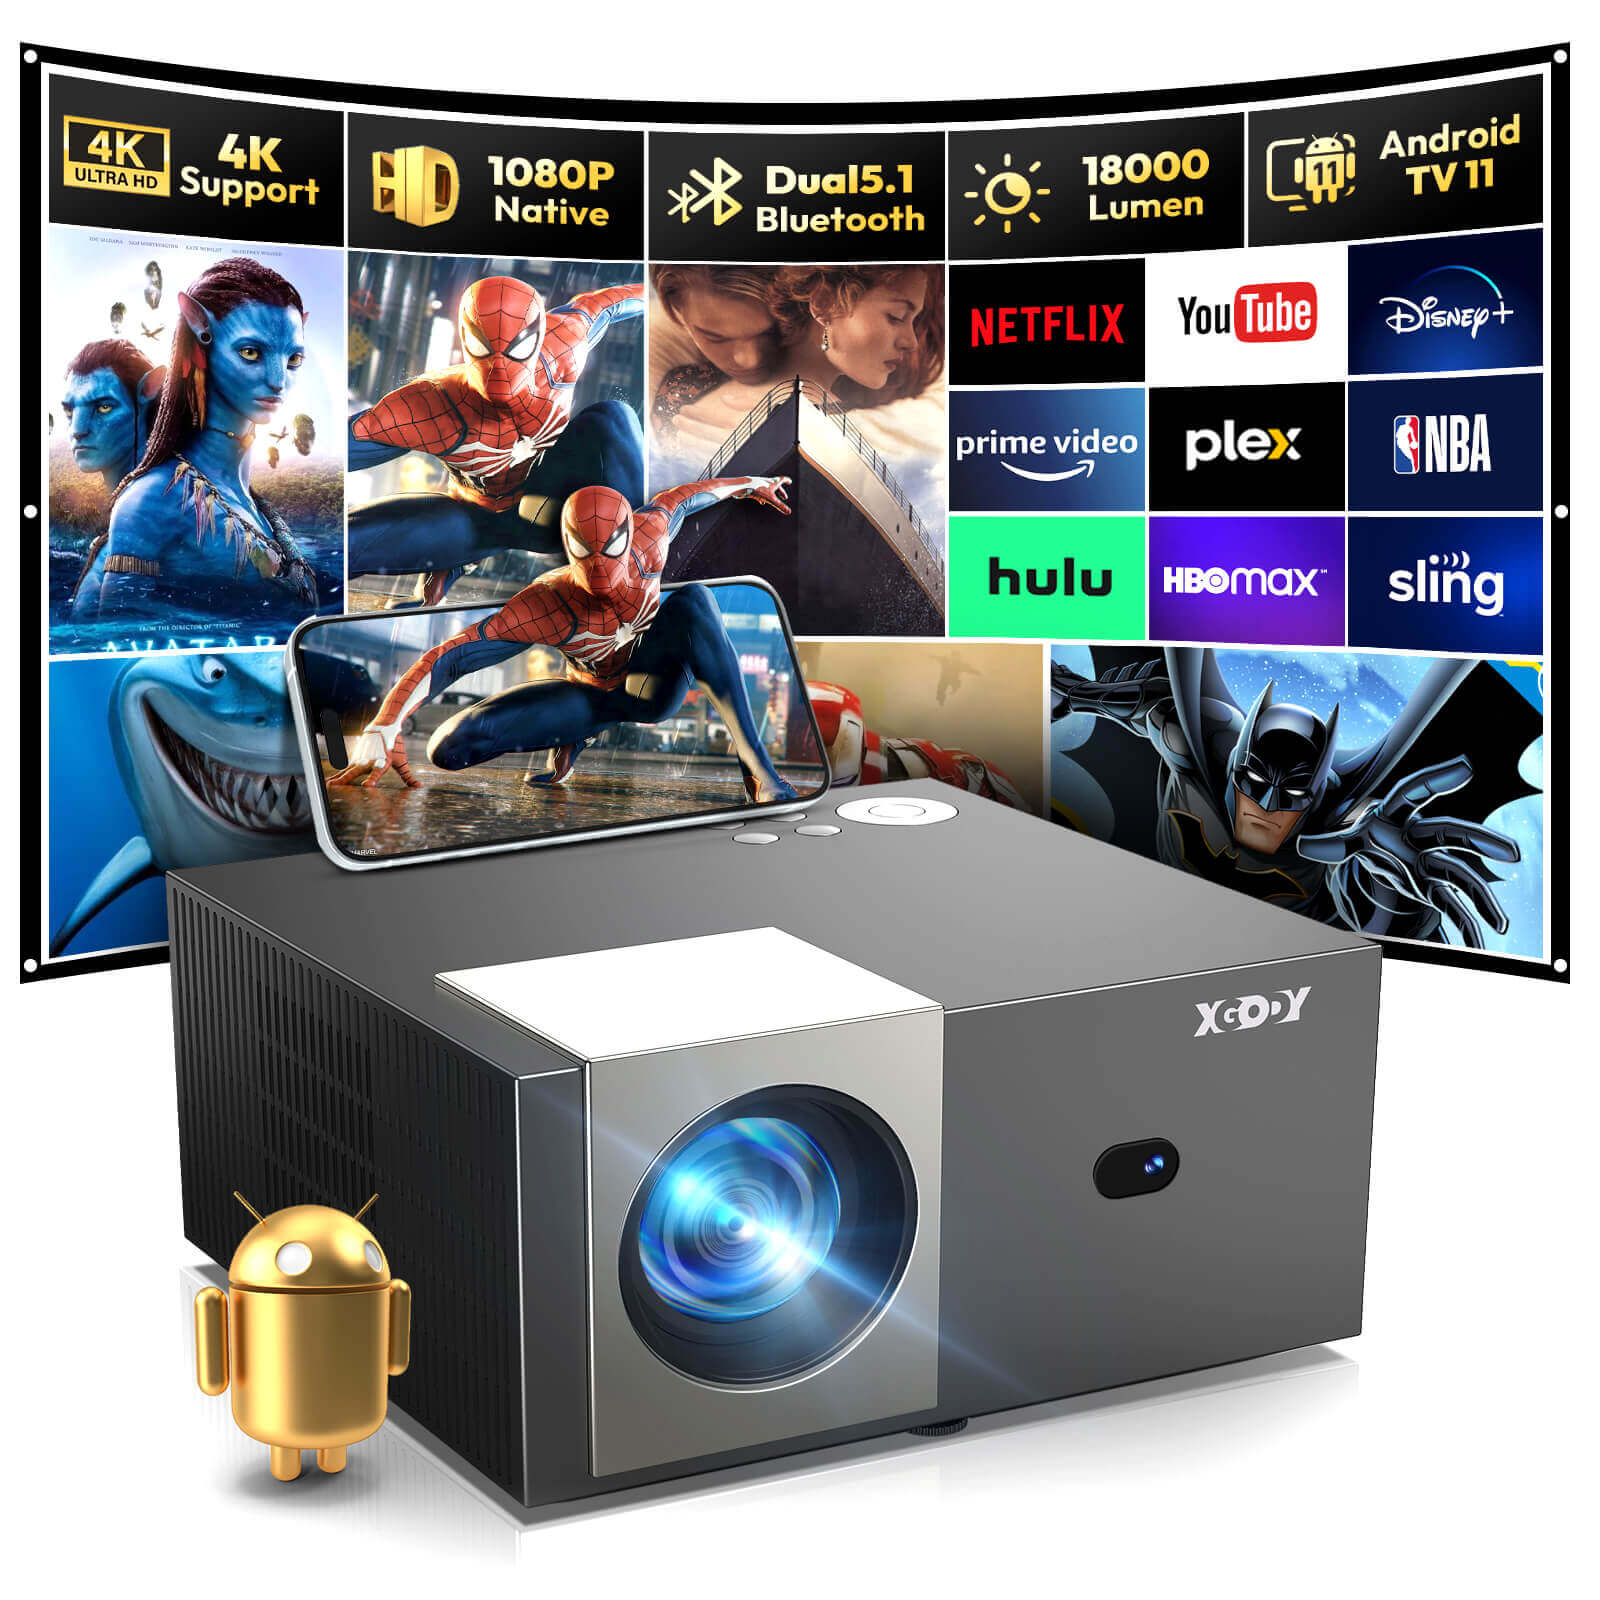 XGODY Sail2 Native 1080p Projector With WiFi And Bluetooth, 200-inch Full HD Large Screen